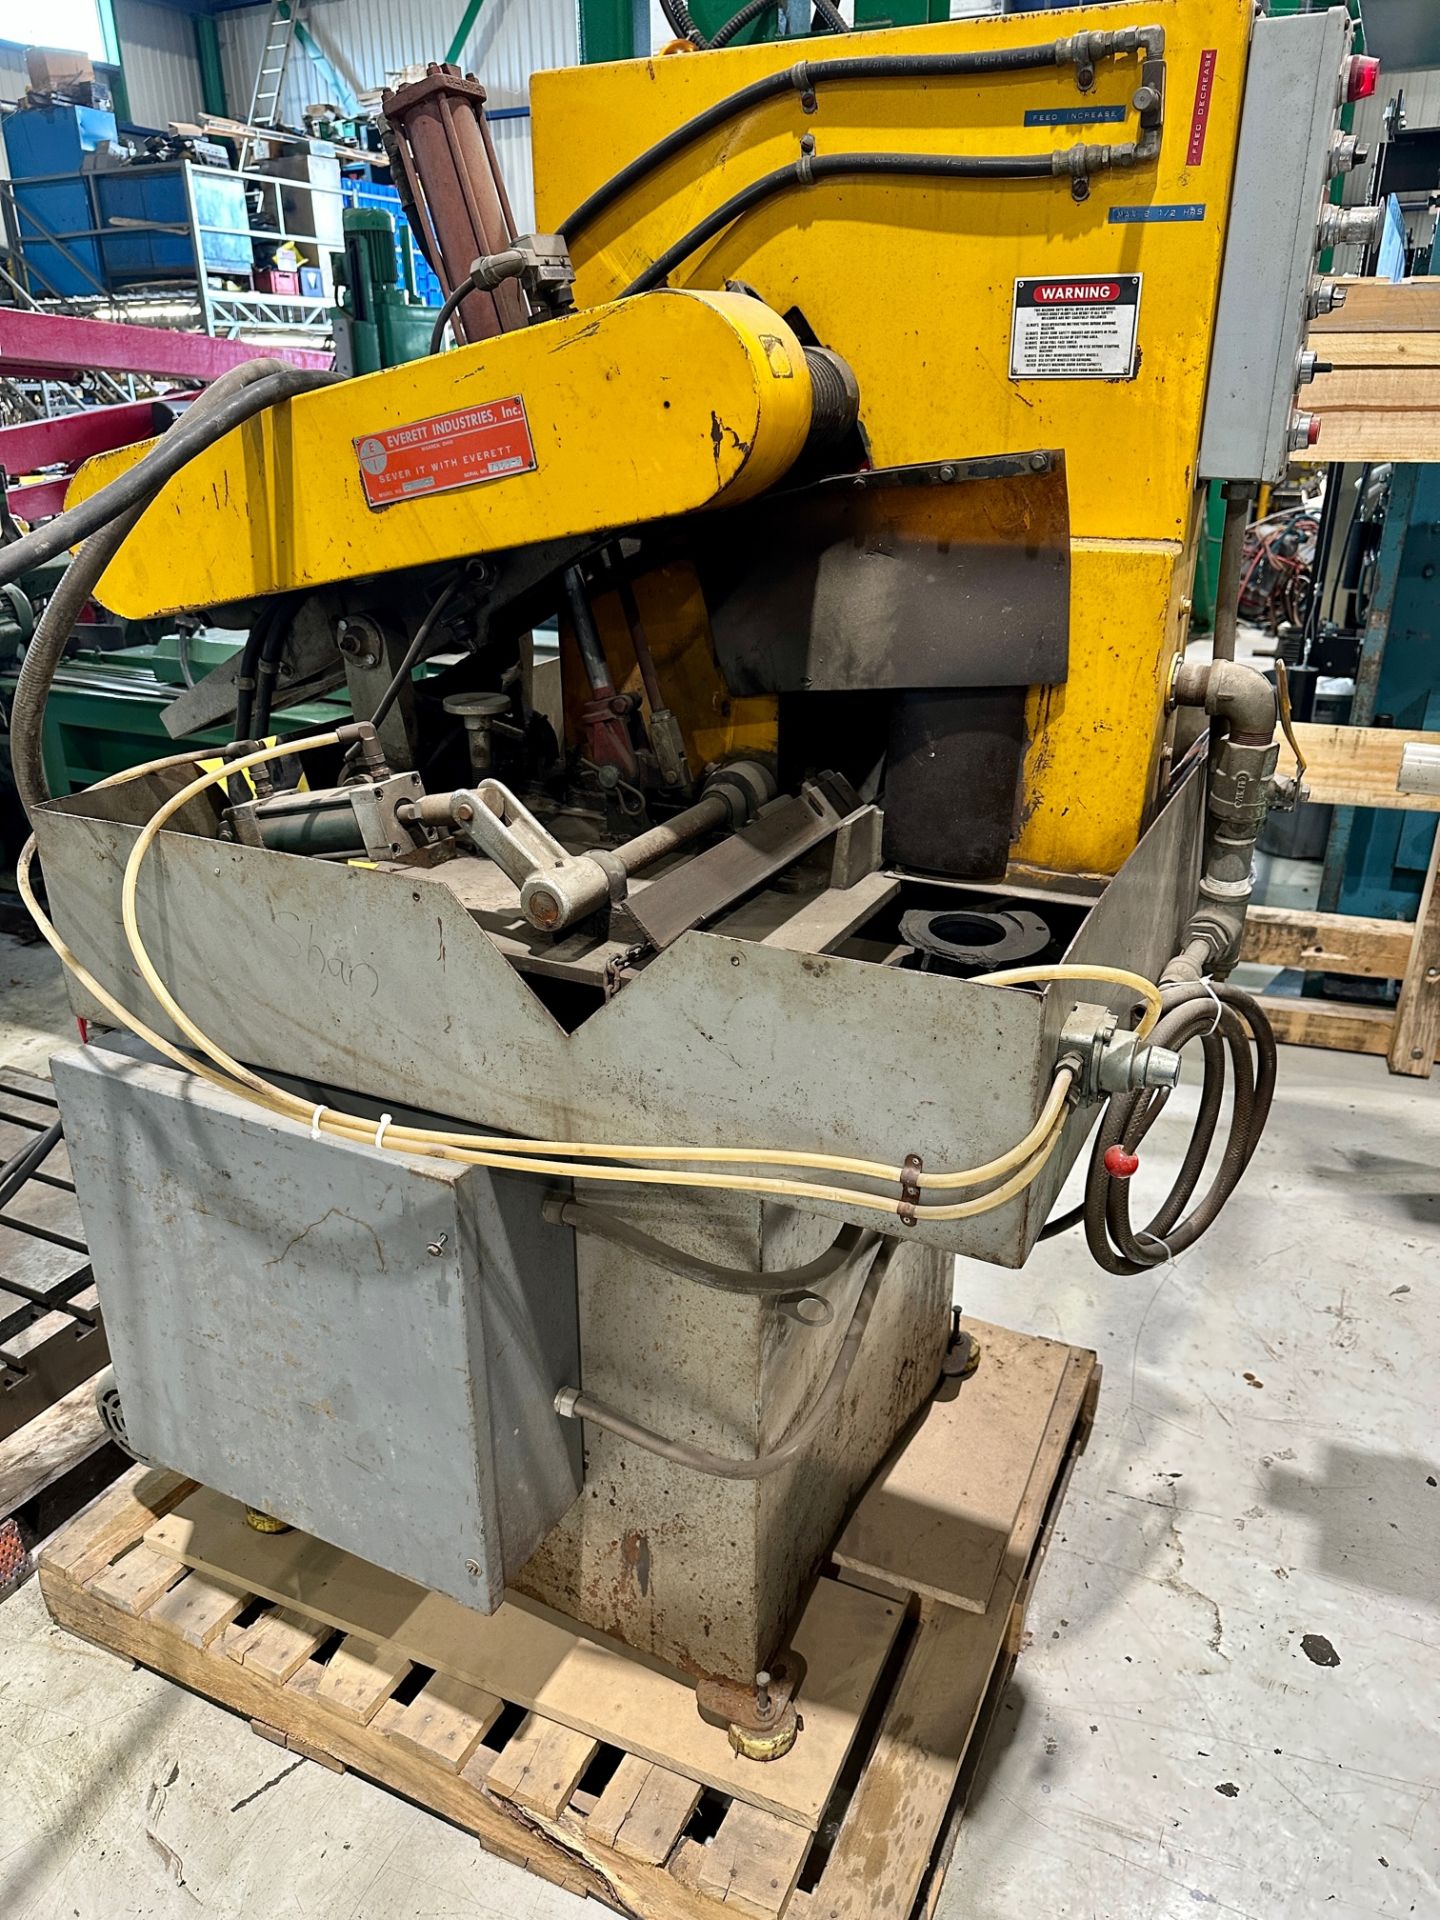 Everett Cold Shaft Saw / Model: 2022 / SN: 7353-5 / Capacity: 20" - Location, Montreal, Quebec